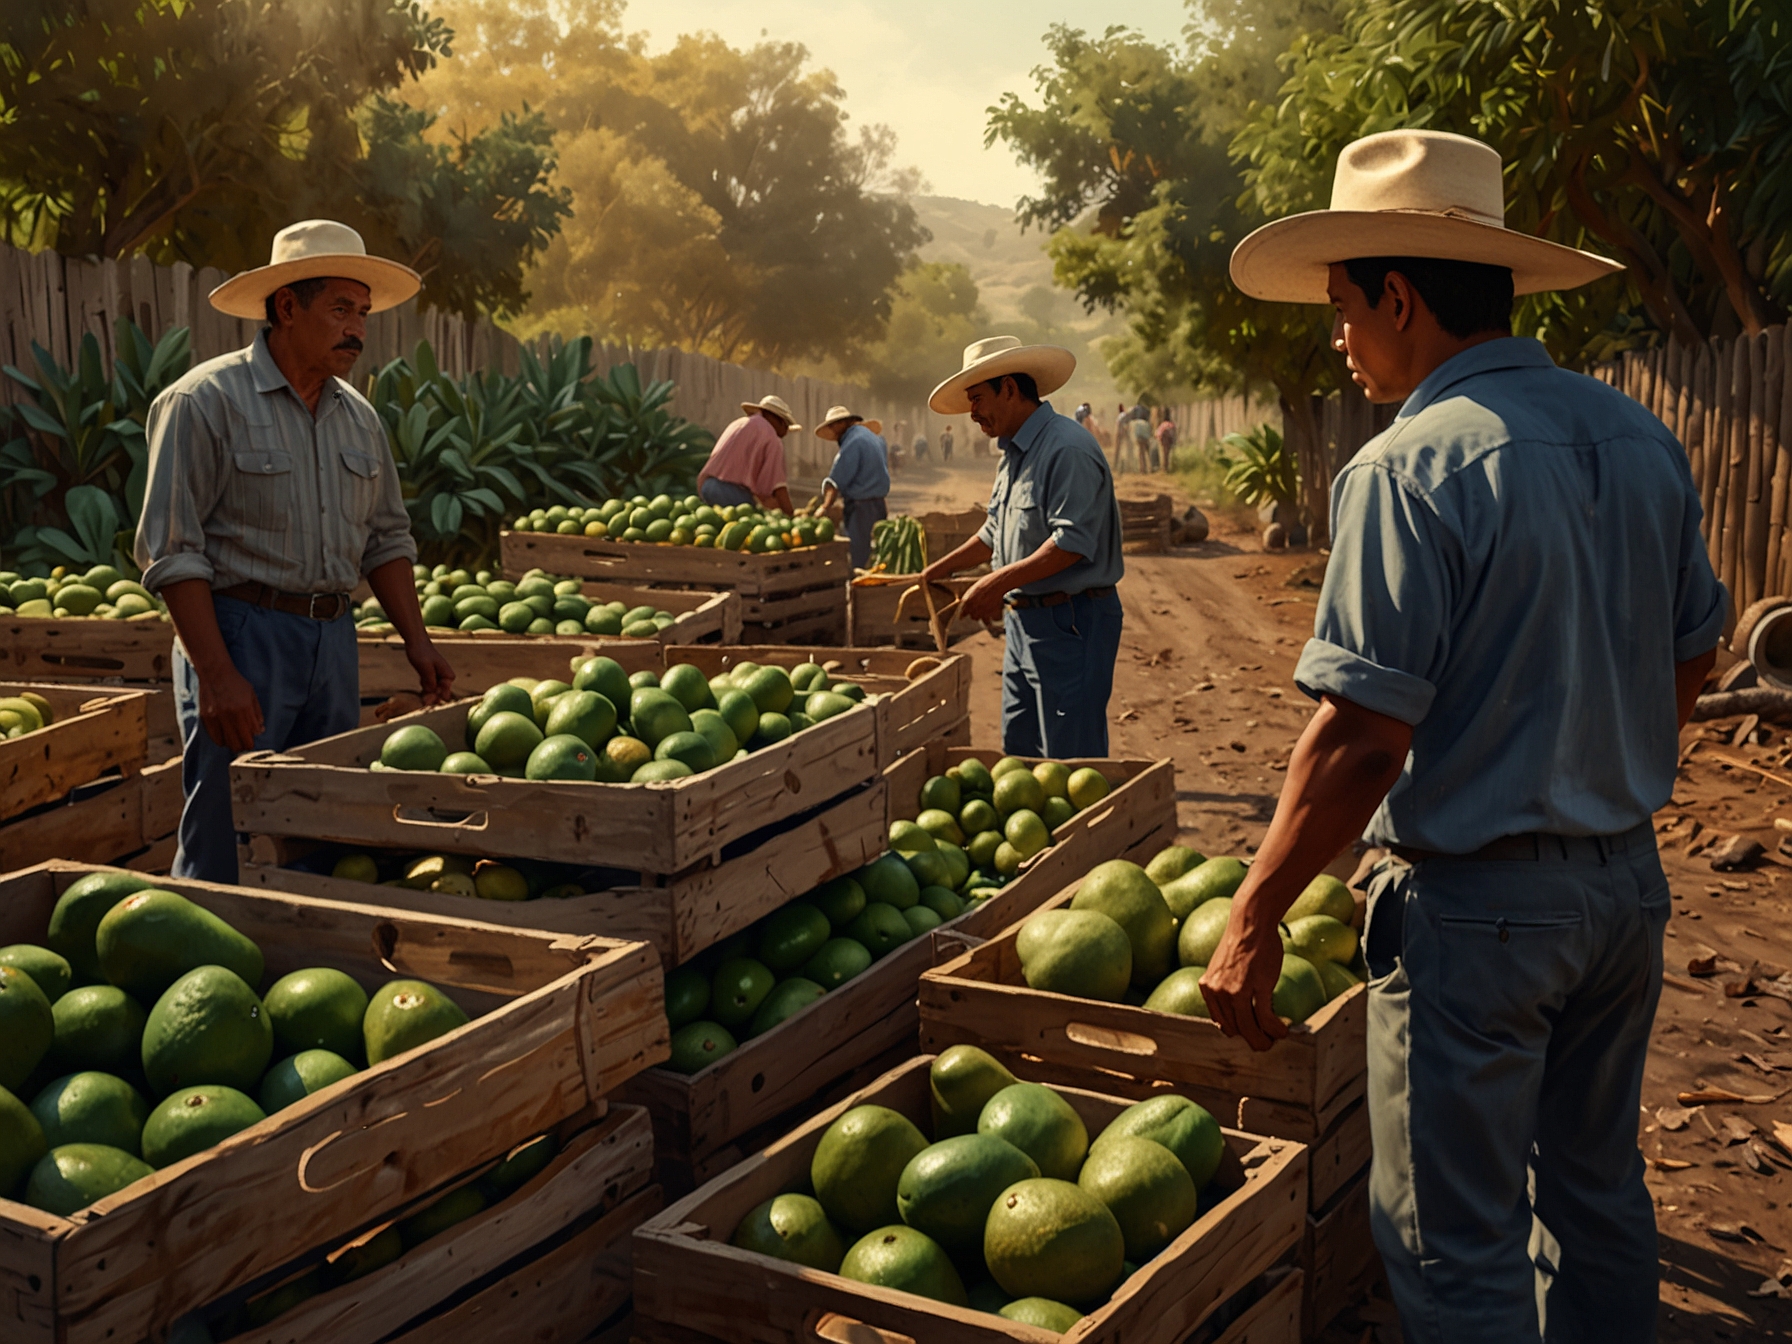 Local Mexican farmers in Michoacan arrange crates of avocados and mangoes, facing uncertainty and economic challenges following the suspension of US inspections due to security threats.